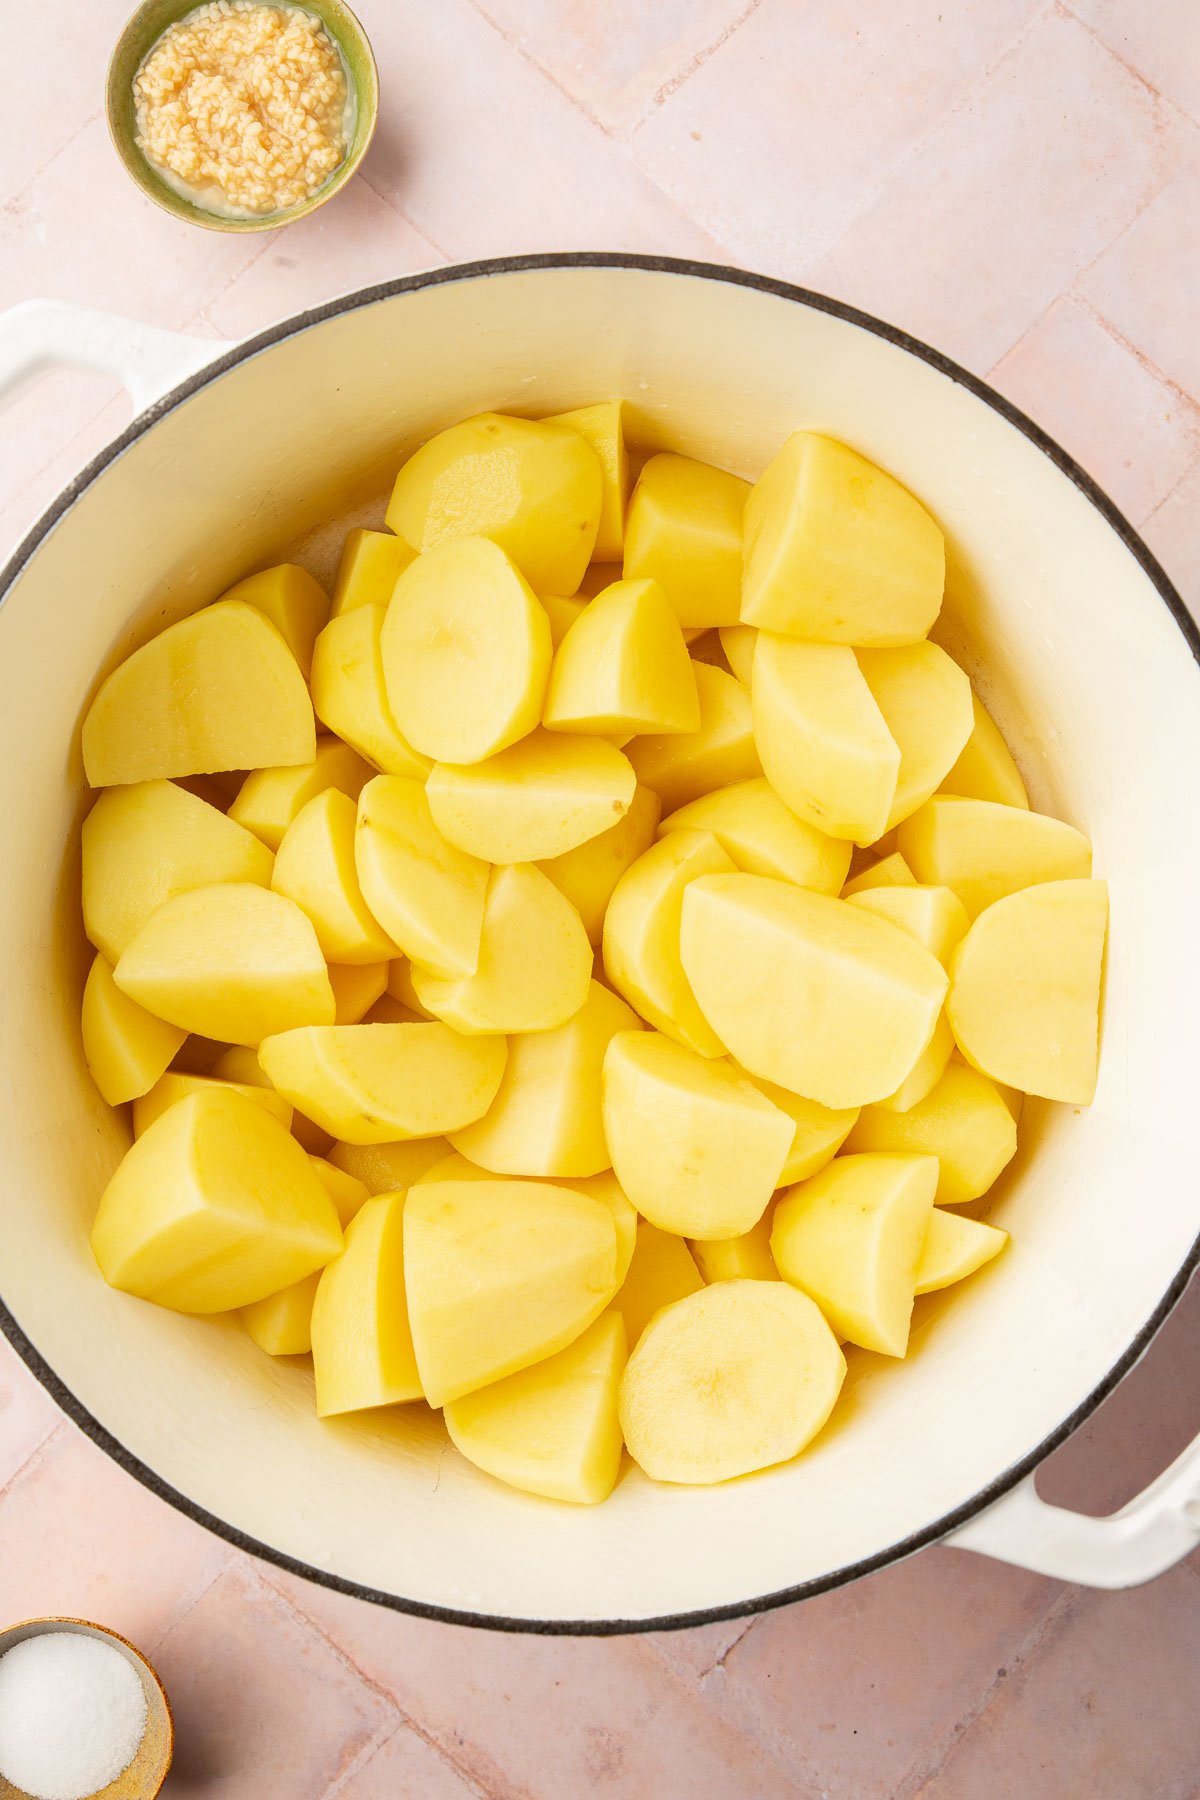 A pot of peeled quartered potatoes with a bowl of garlic and salt on the side.